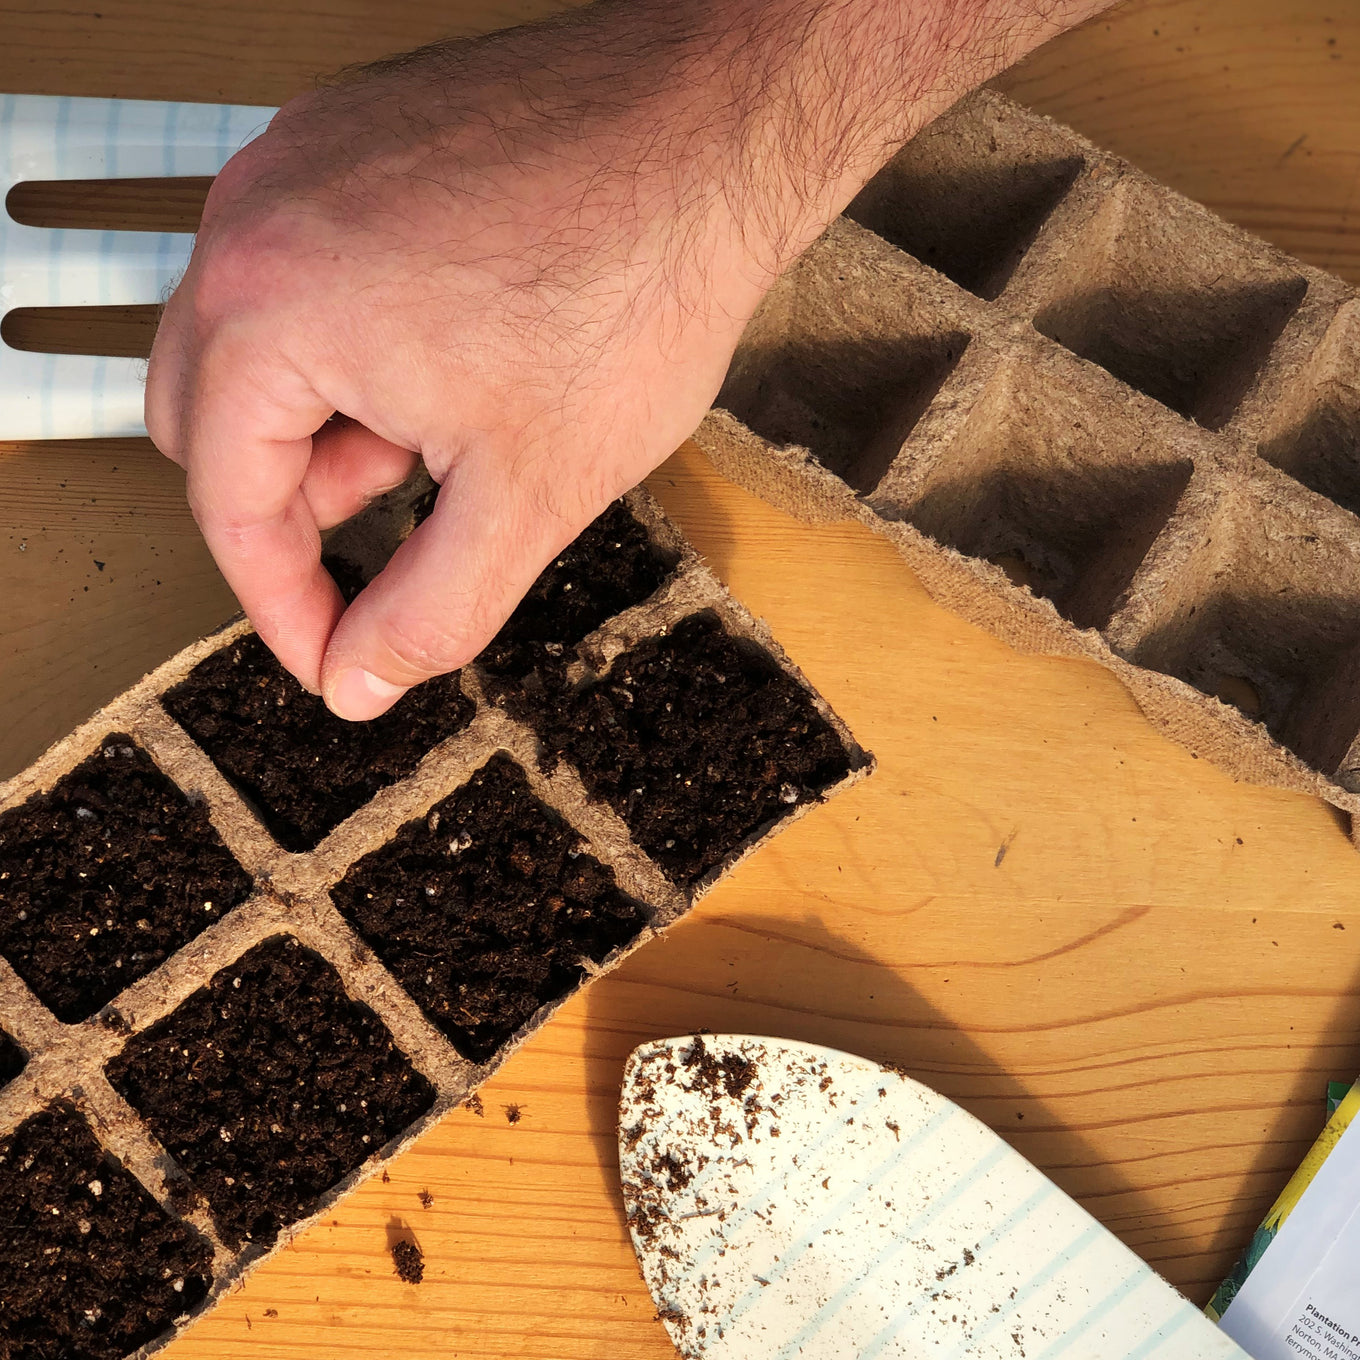 Sowing Organic Green Sprouting Calabrese Broccoli Seeds into Jiffy seed starting peat strip trays filled with seed starting mix.